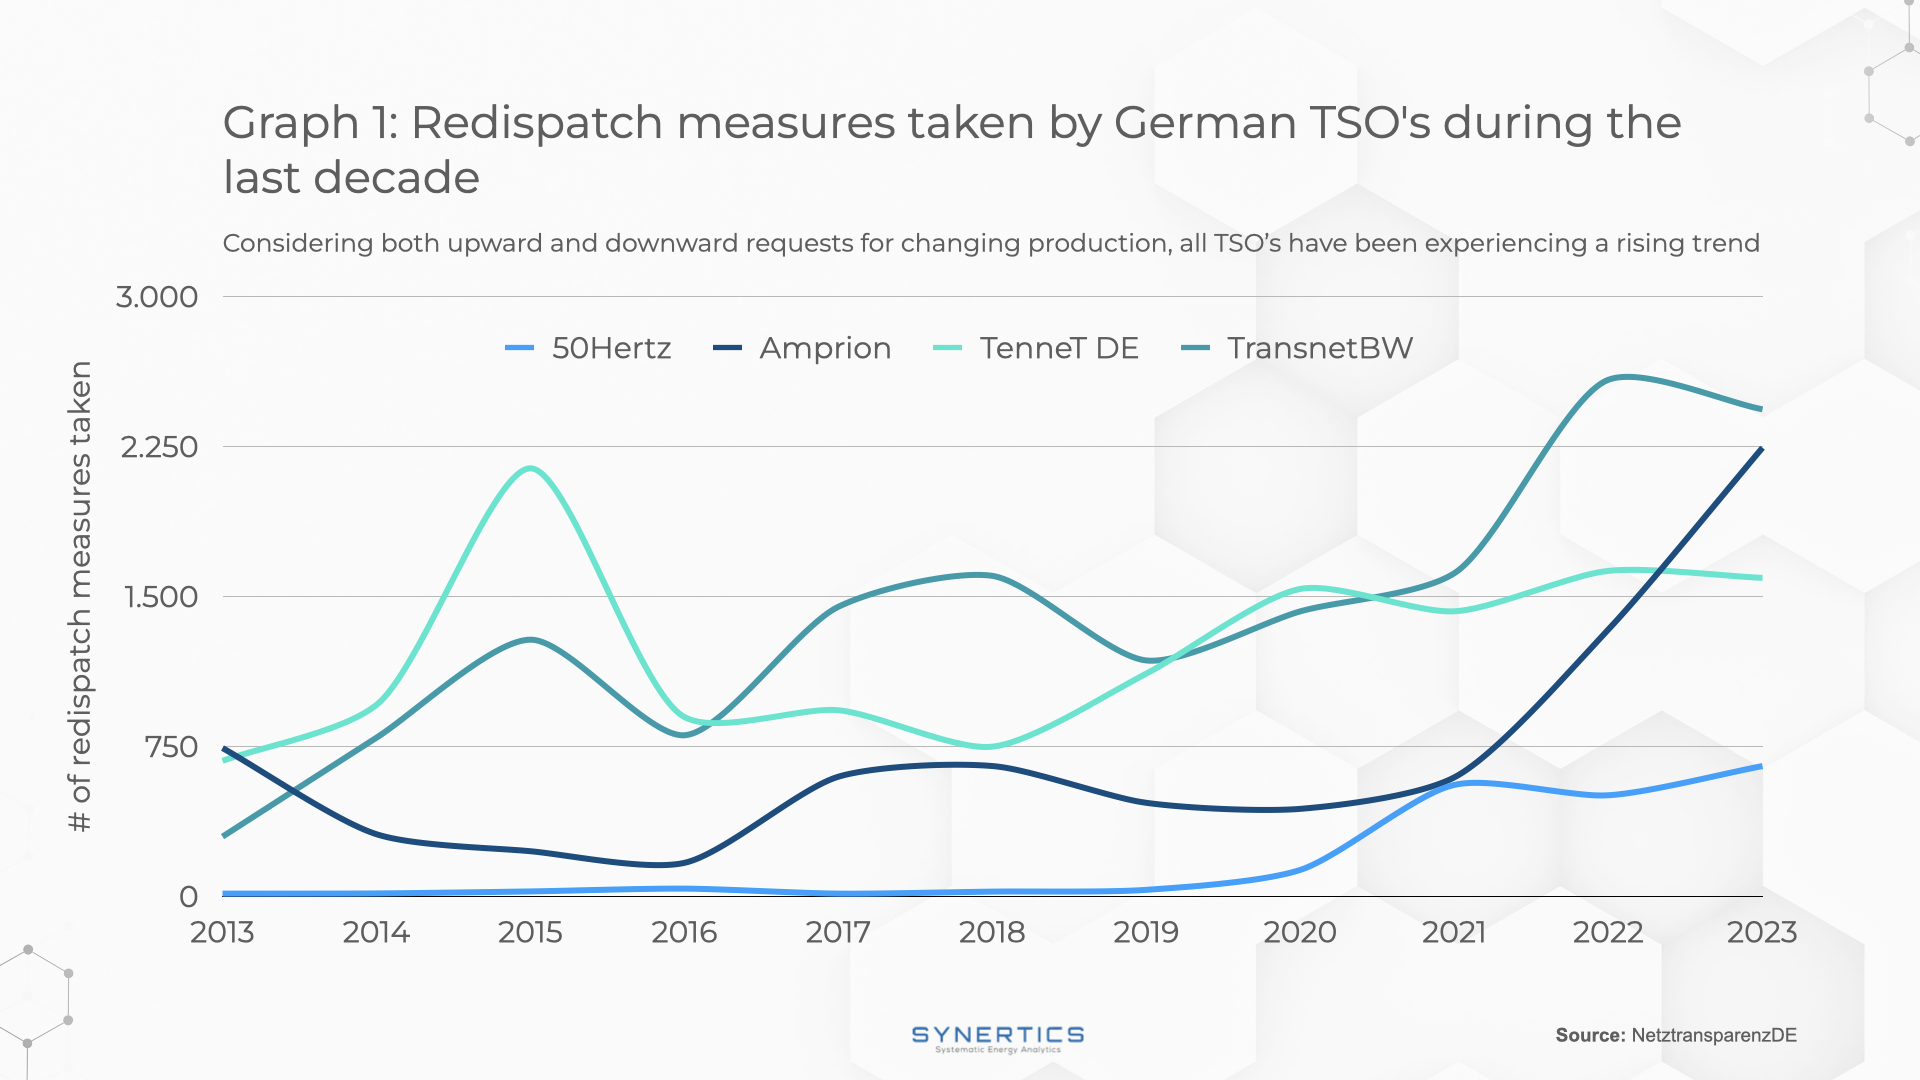 Redispatch measures taken by German TSOs during the last decade